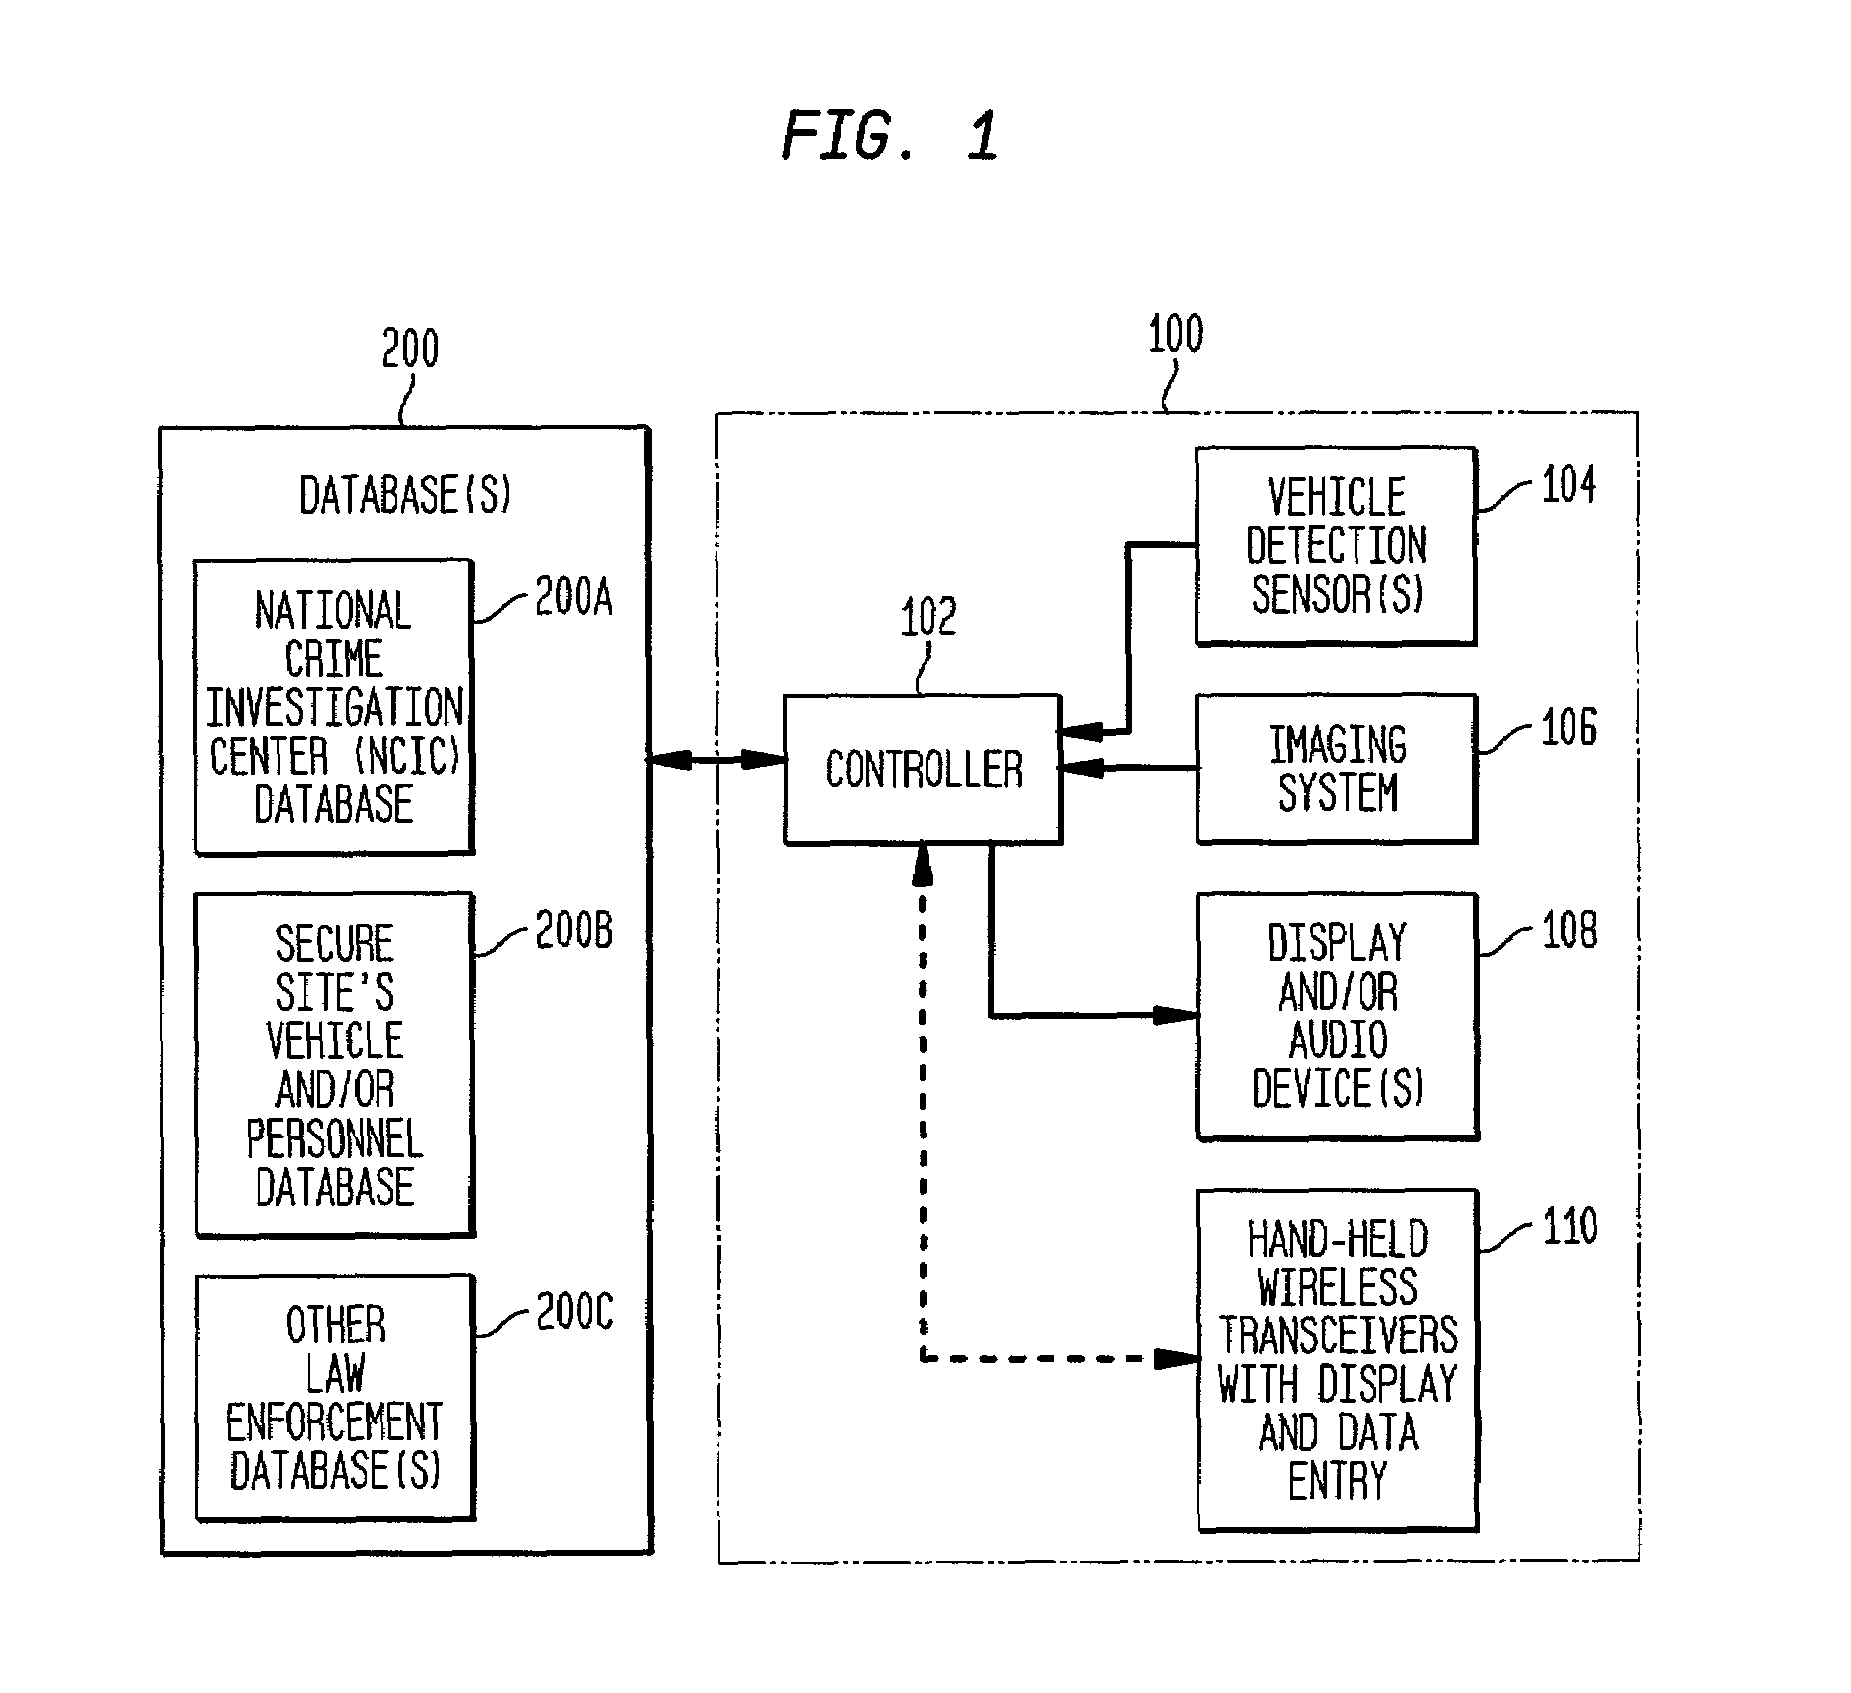 Automatic vehicle information retrieval for use at entry to a secure site